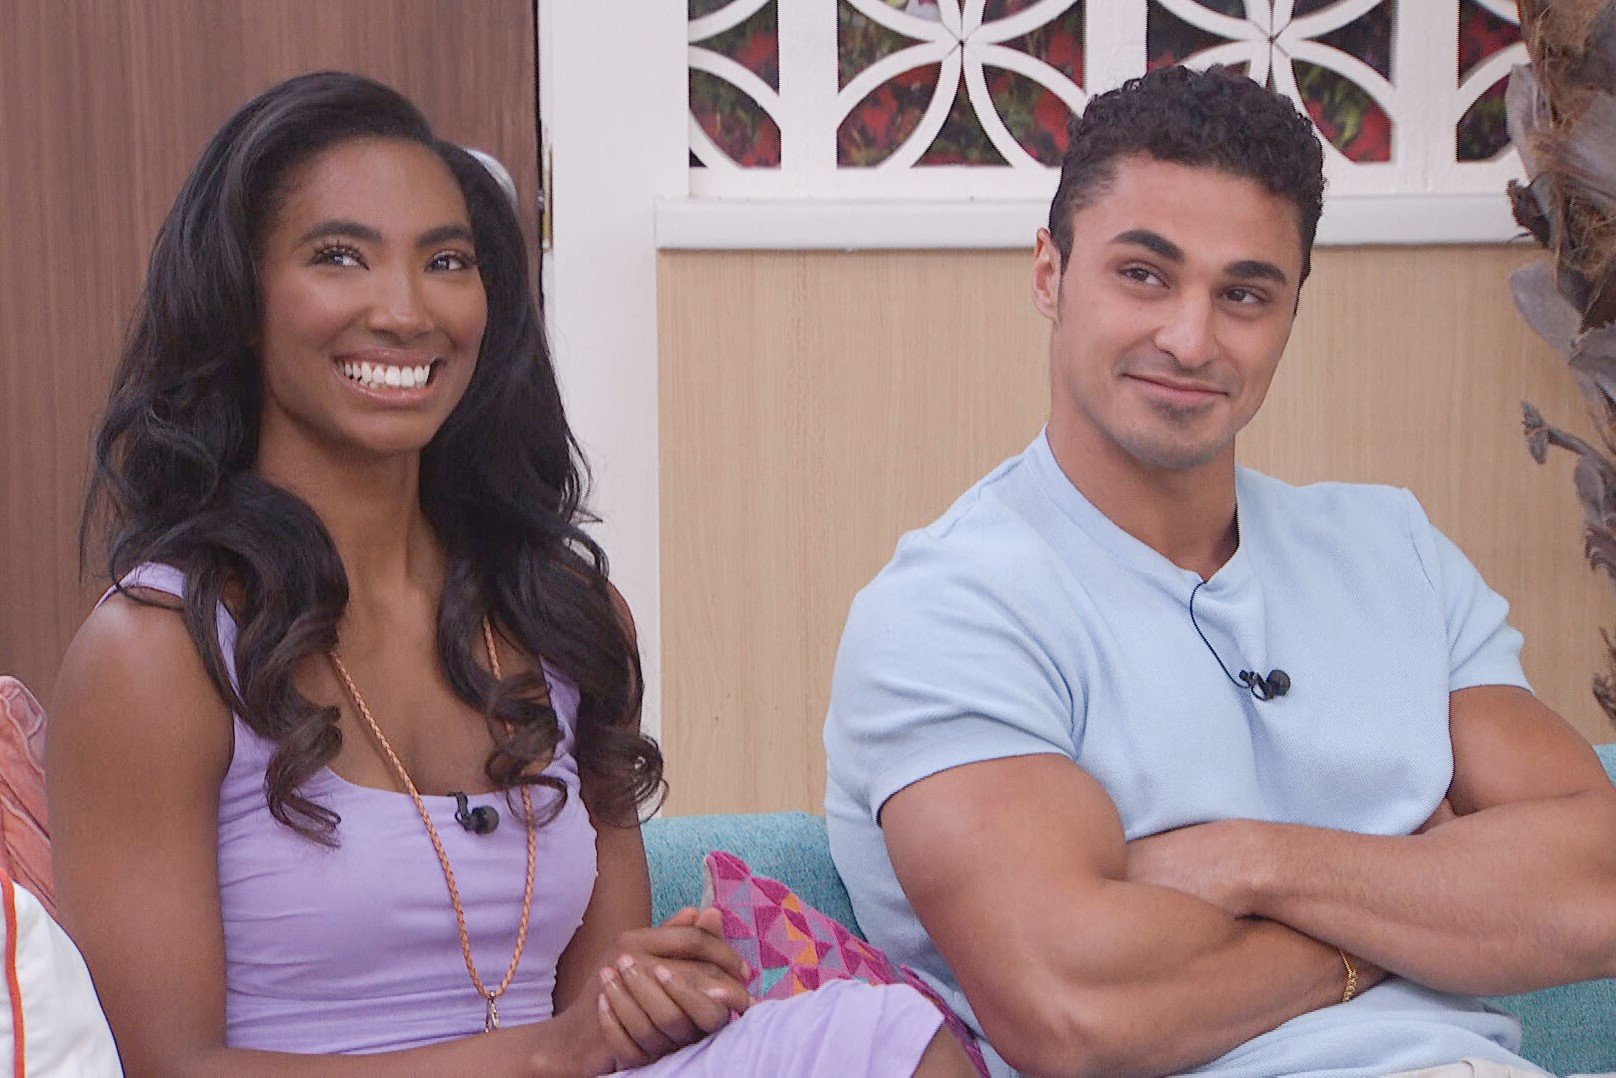 Taylor Hale and Joseph Abdin, who met in 'Big Brother 24' on CBS, sit next to each other on a couch.